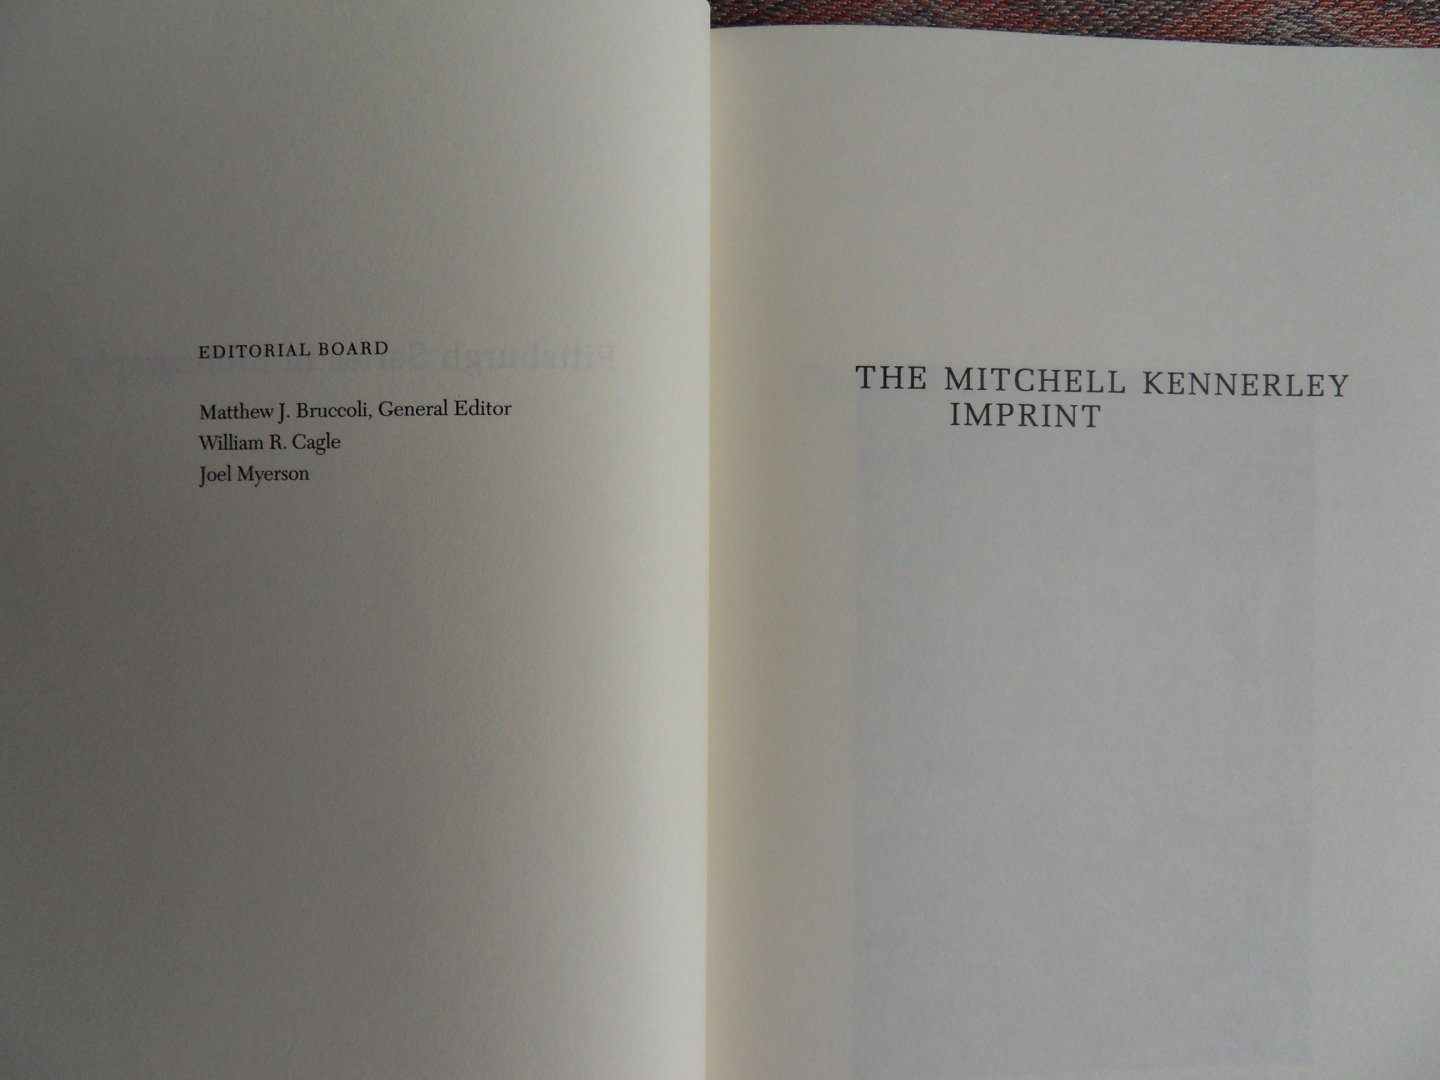 Boice, Daniel. - The Mitchell Kennerley Imprint. - In the Pittsburgh Series in Bibliography.